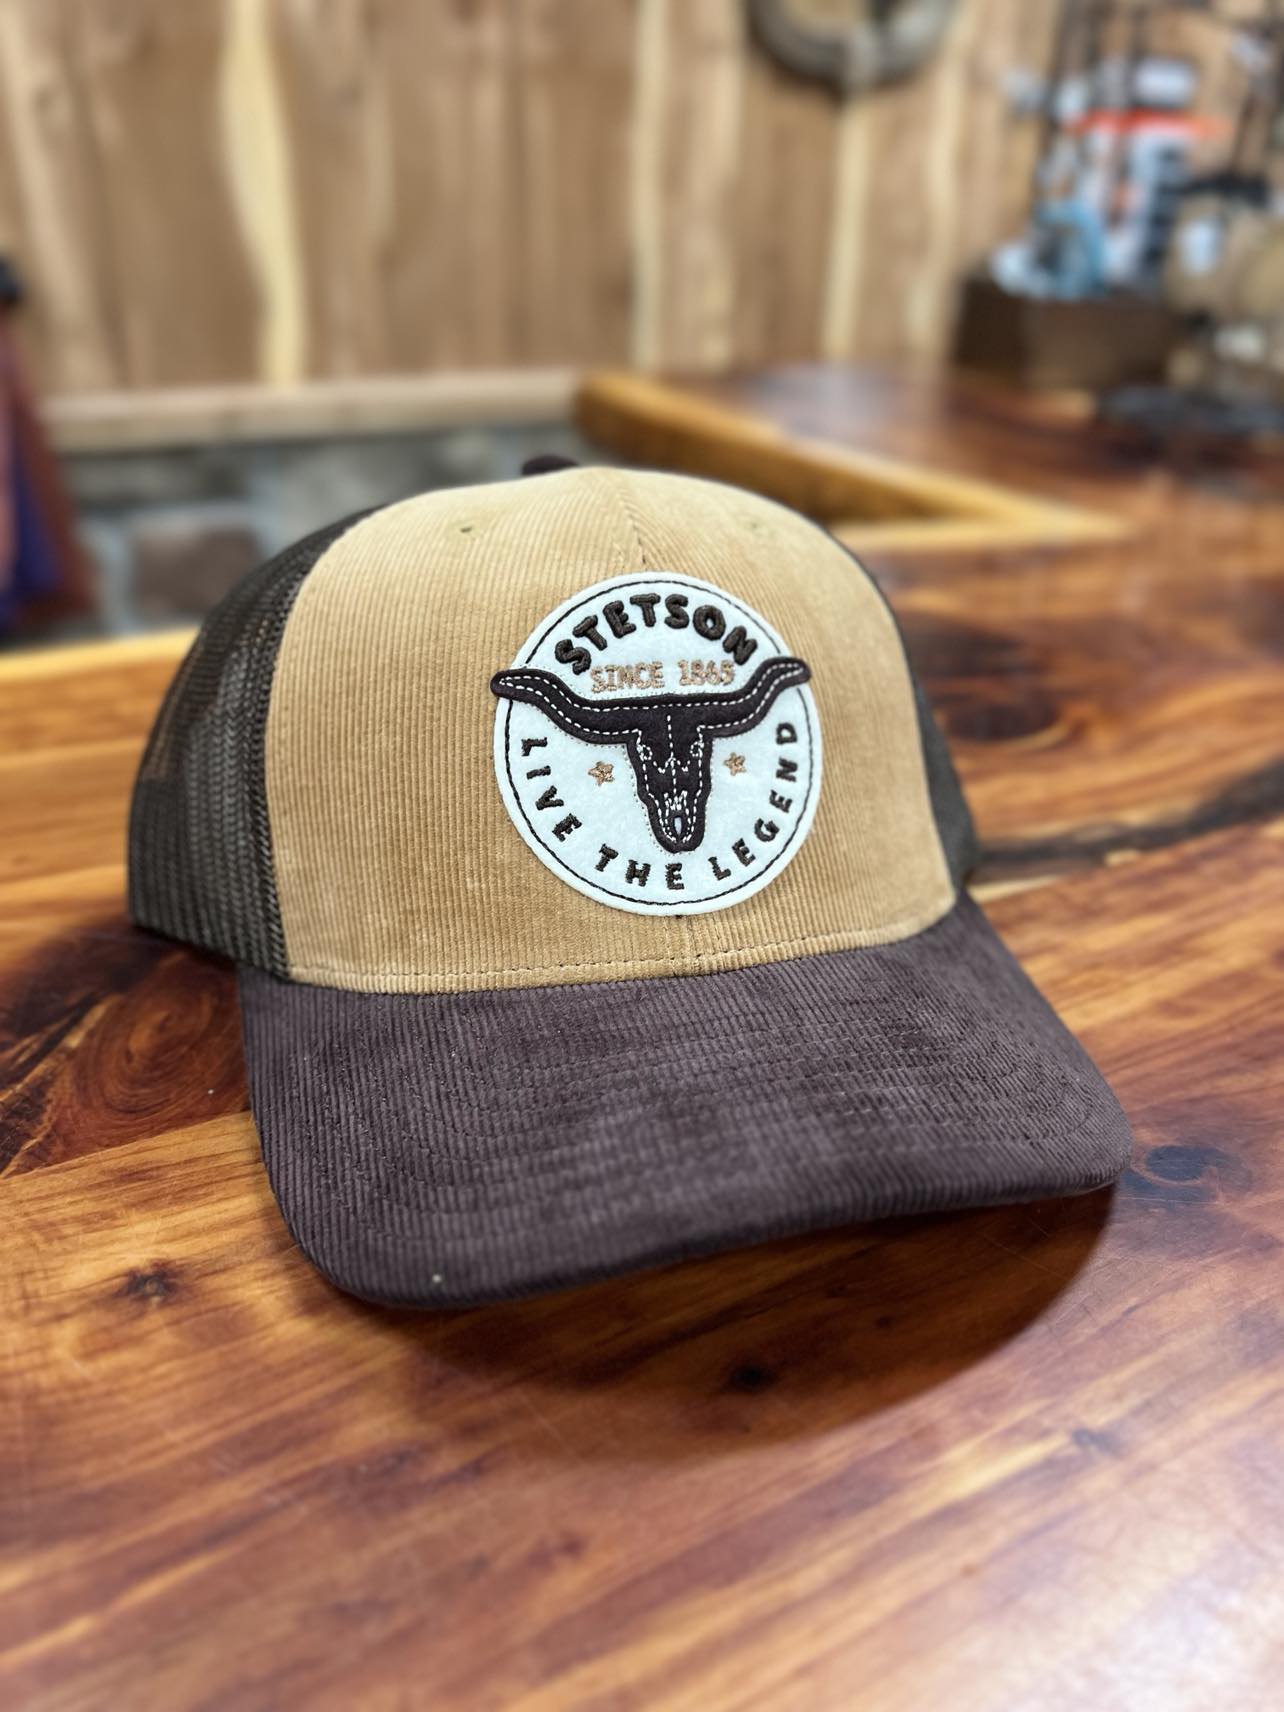 Stetson Live the Legend Ball Cap-Caps-Karman-Lucky J Boots & More, Women's, Men's, & Kids Western Store Located in Carthage, MO